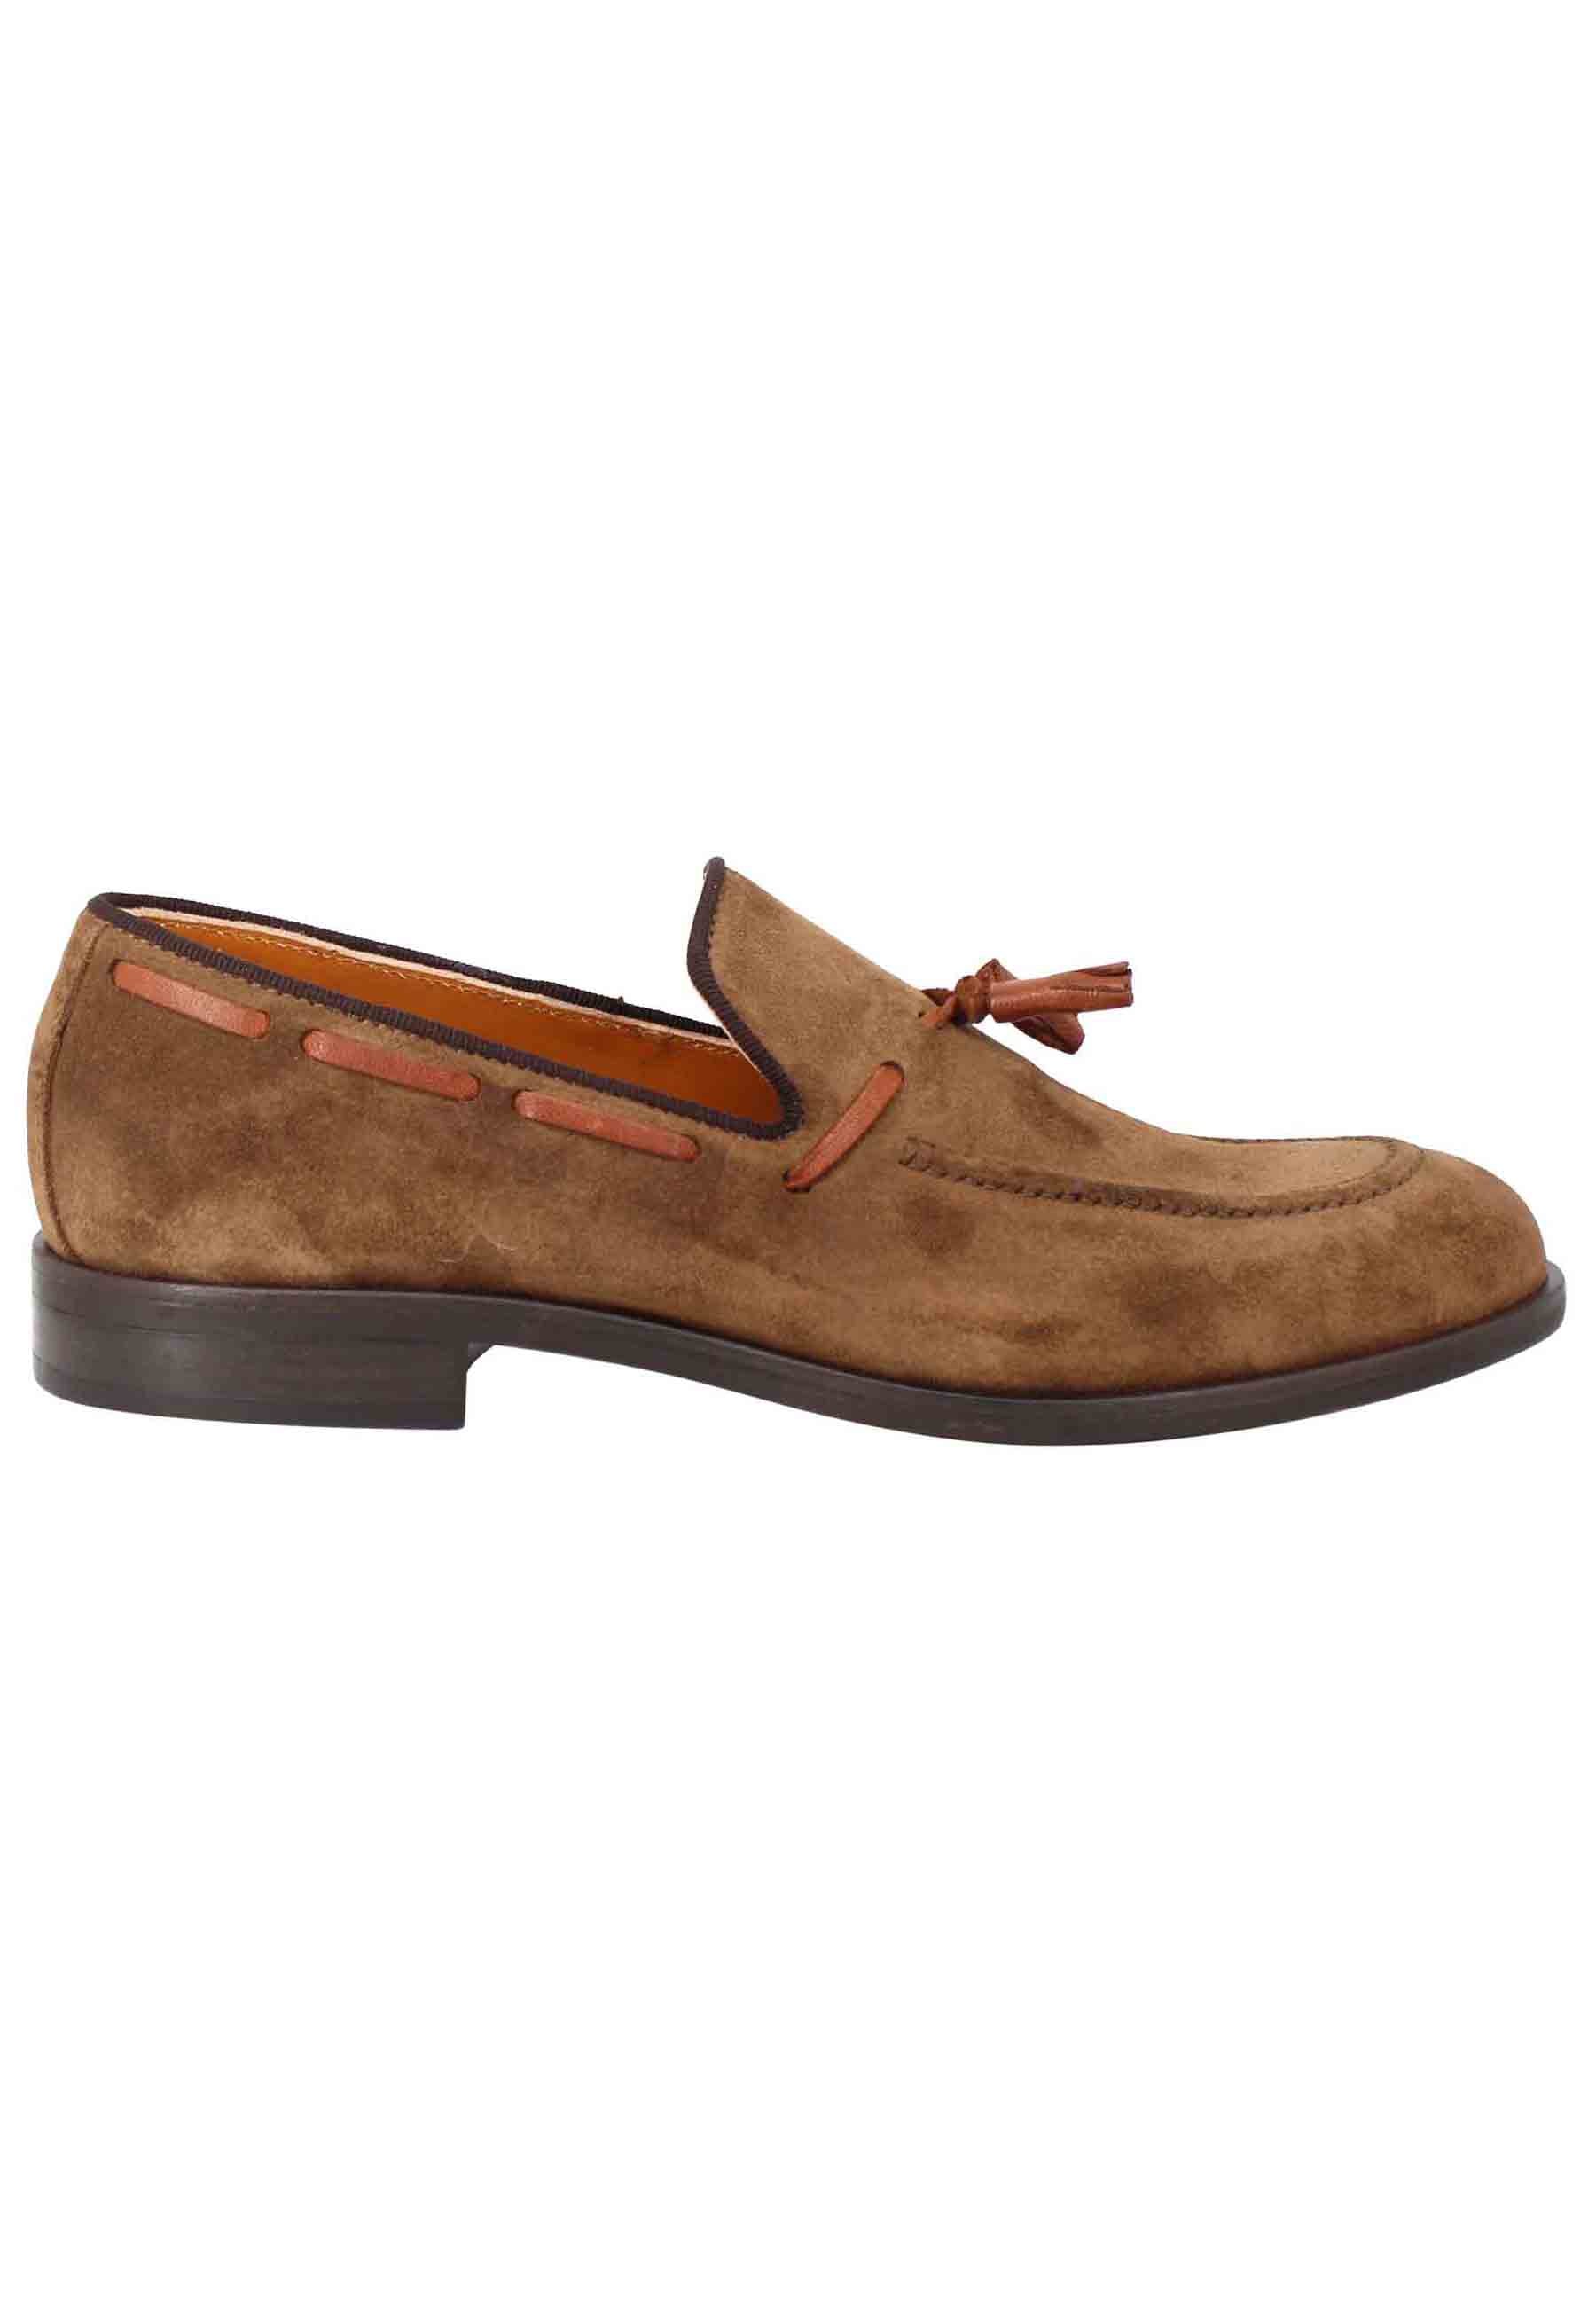 Men's loafers in brown suede with leather tassels and rubber sole